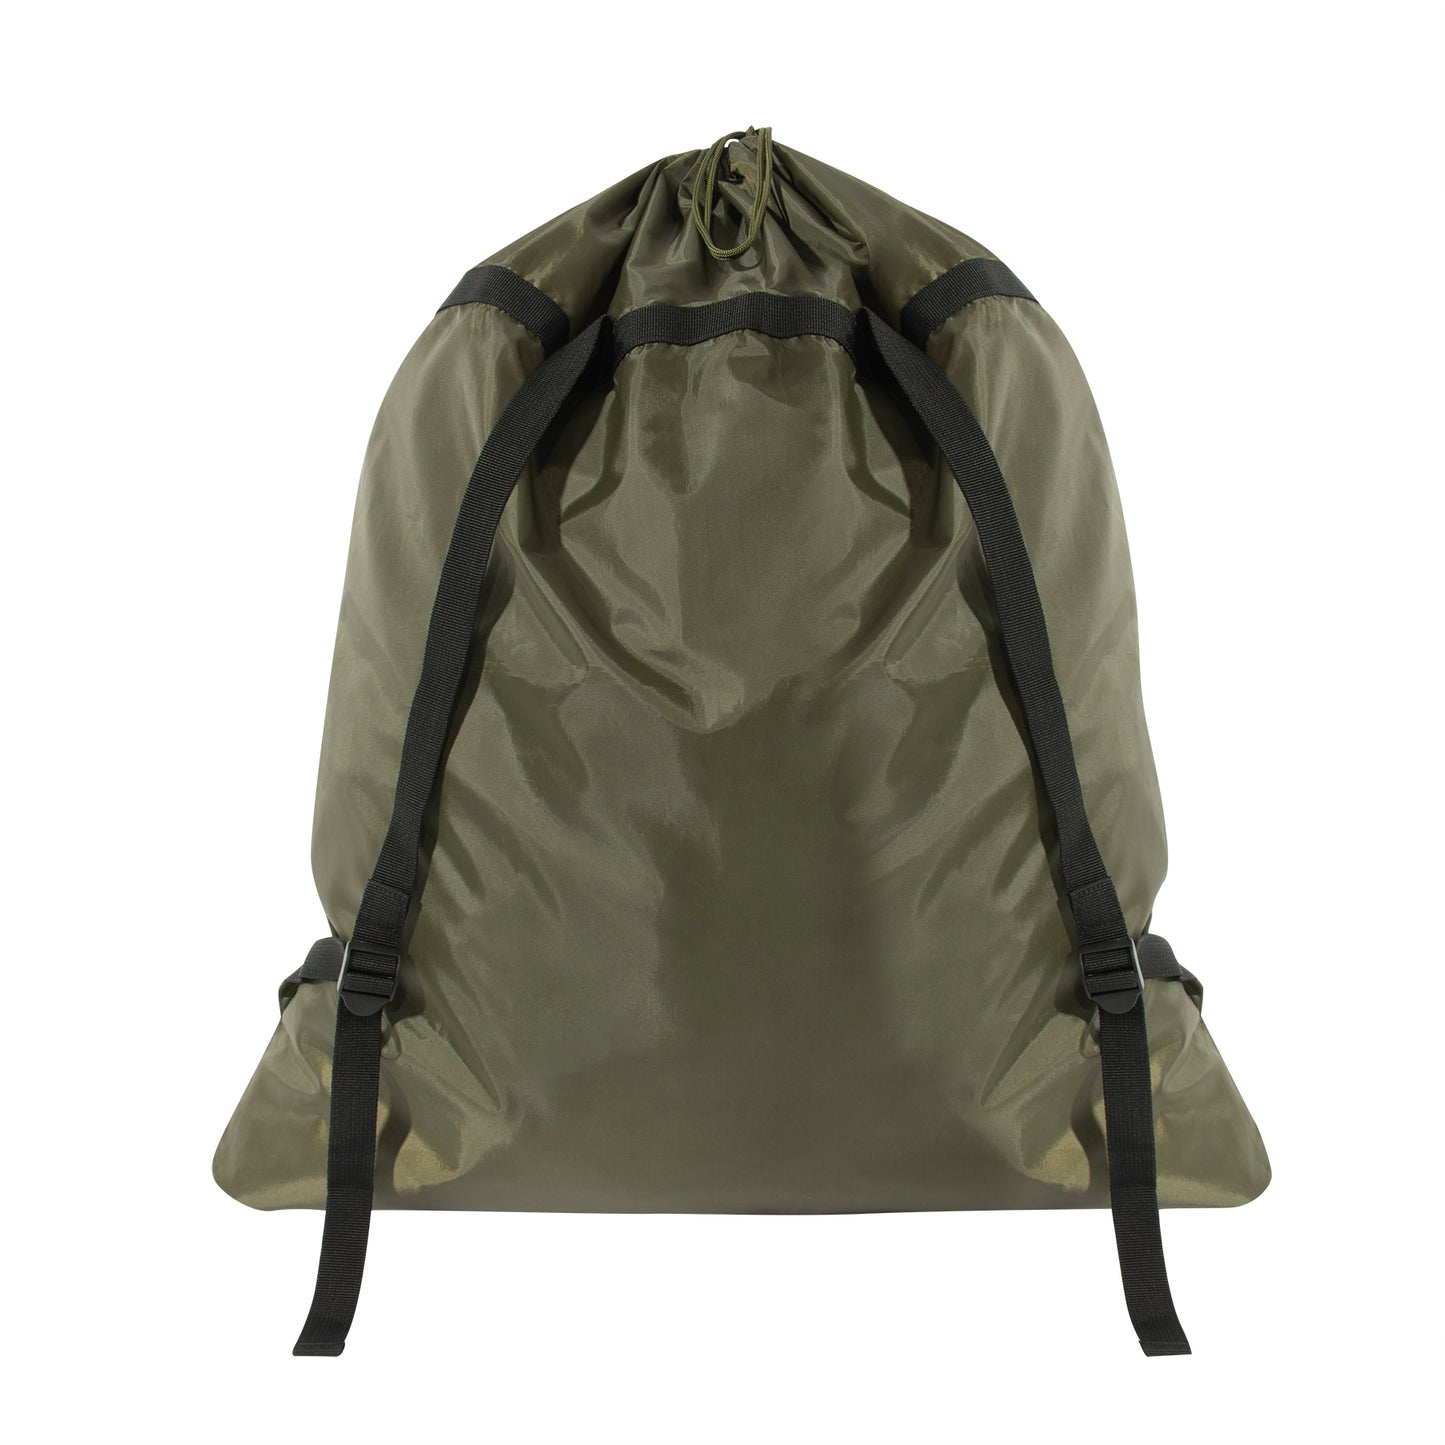 Rothco Packable Laundry Bag Backpack - Olive Drab